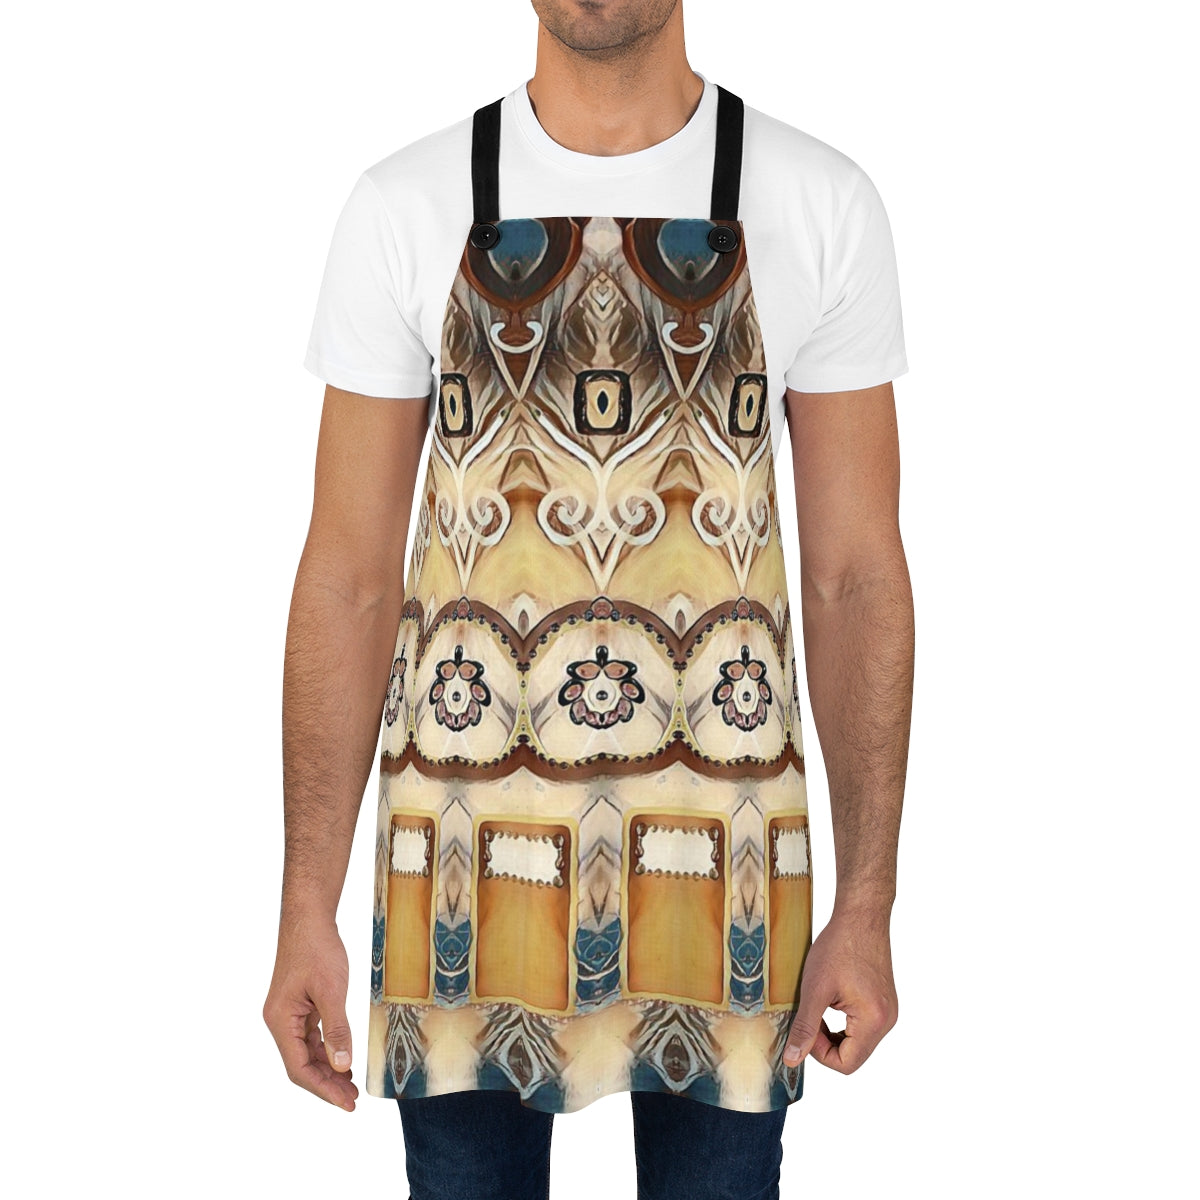 cream and brown colored country style designer apron